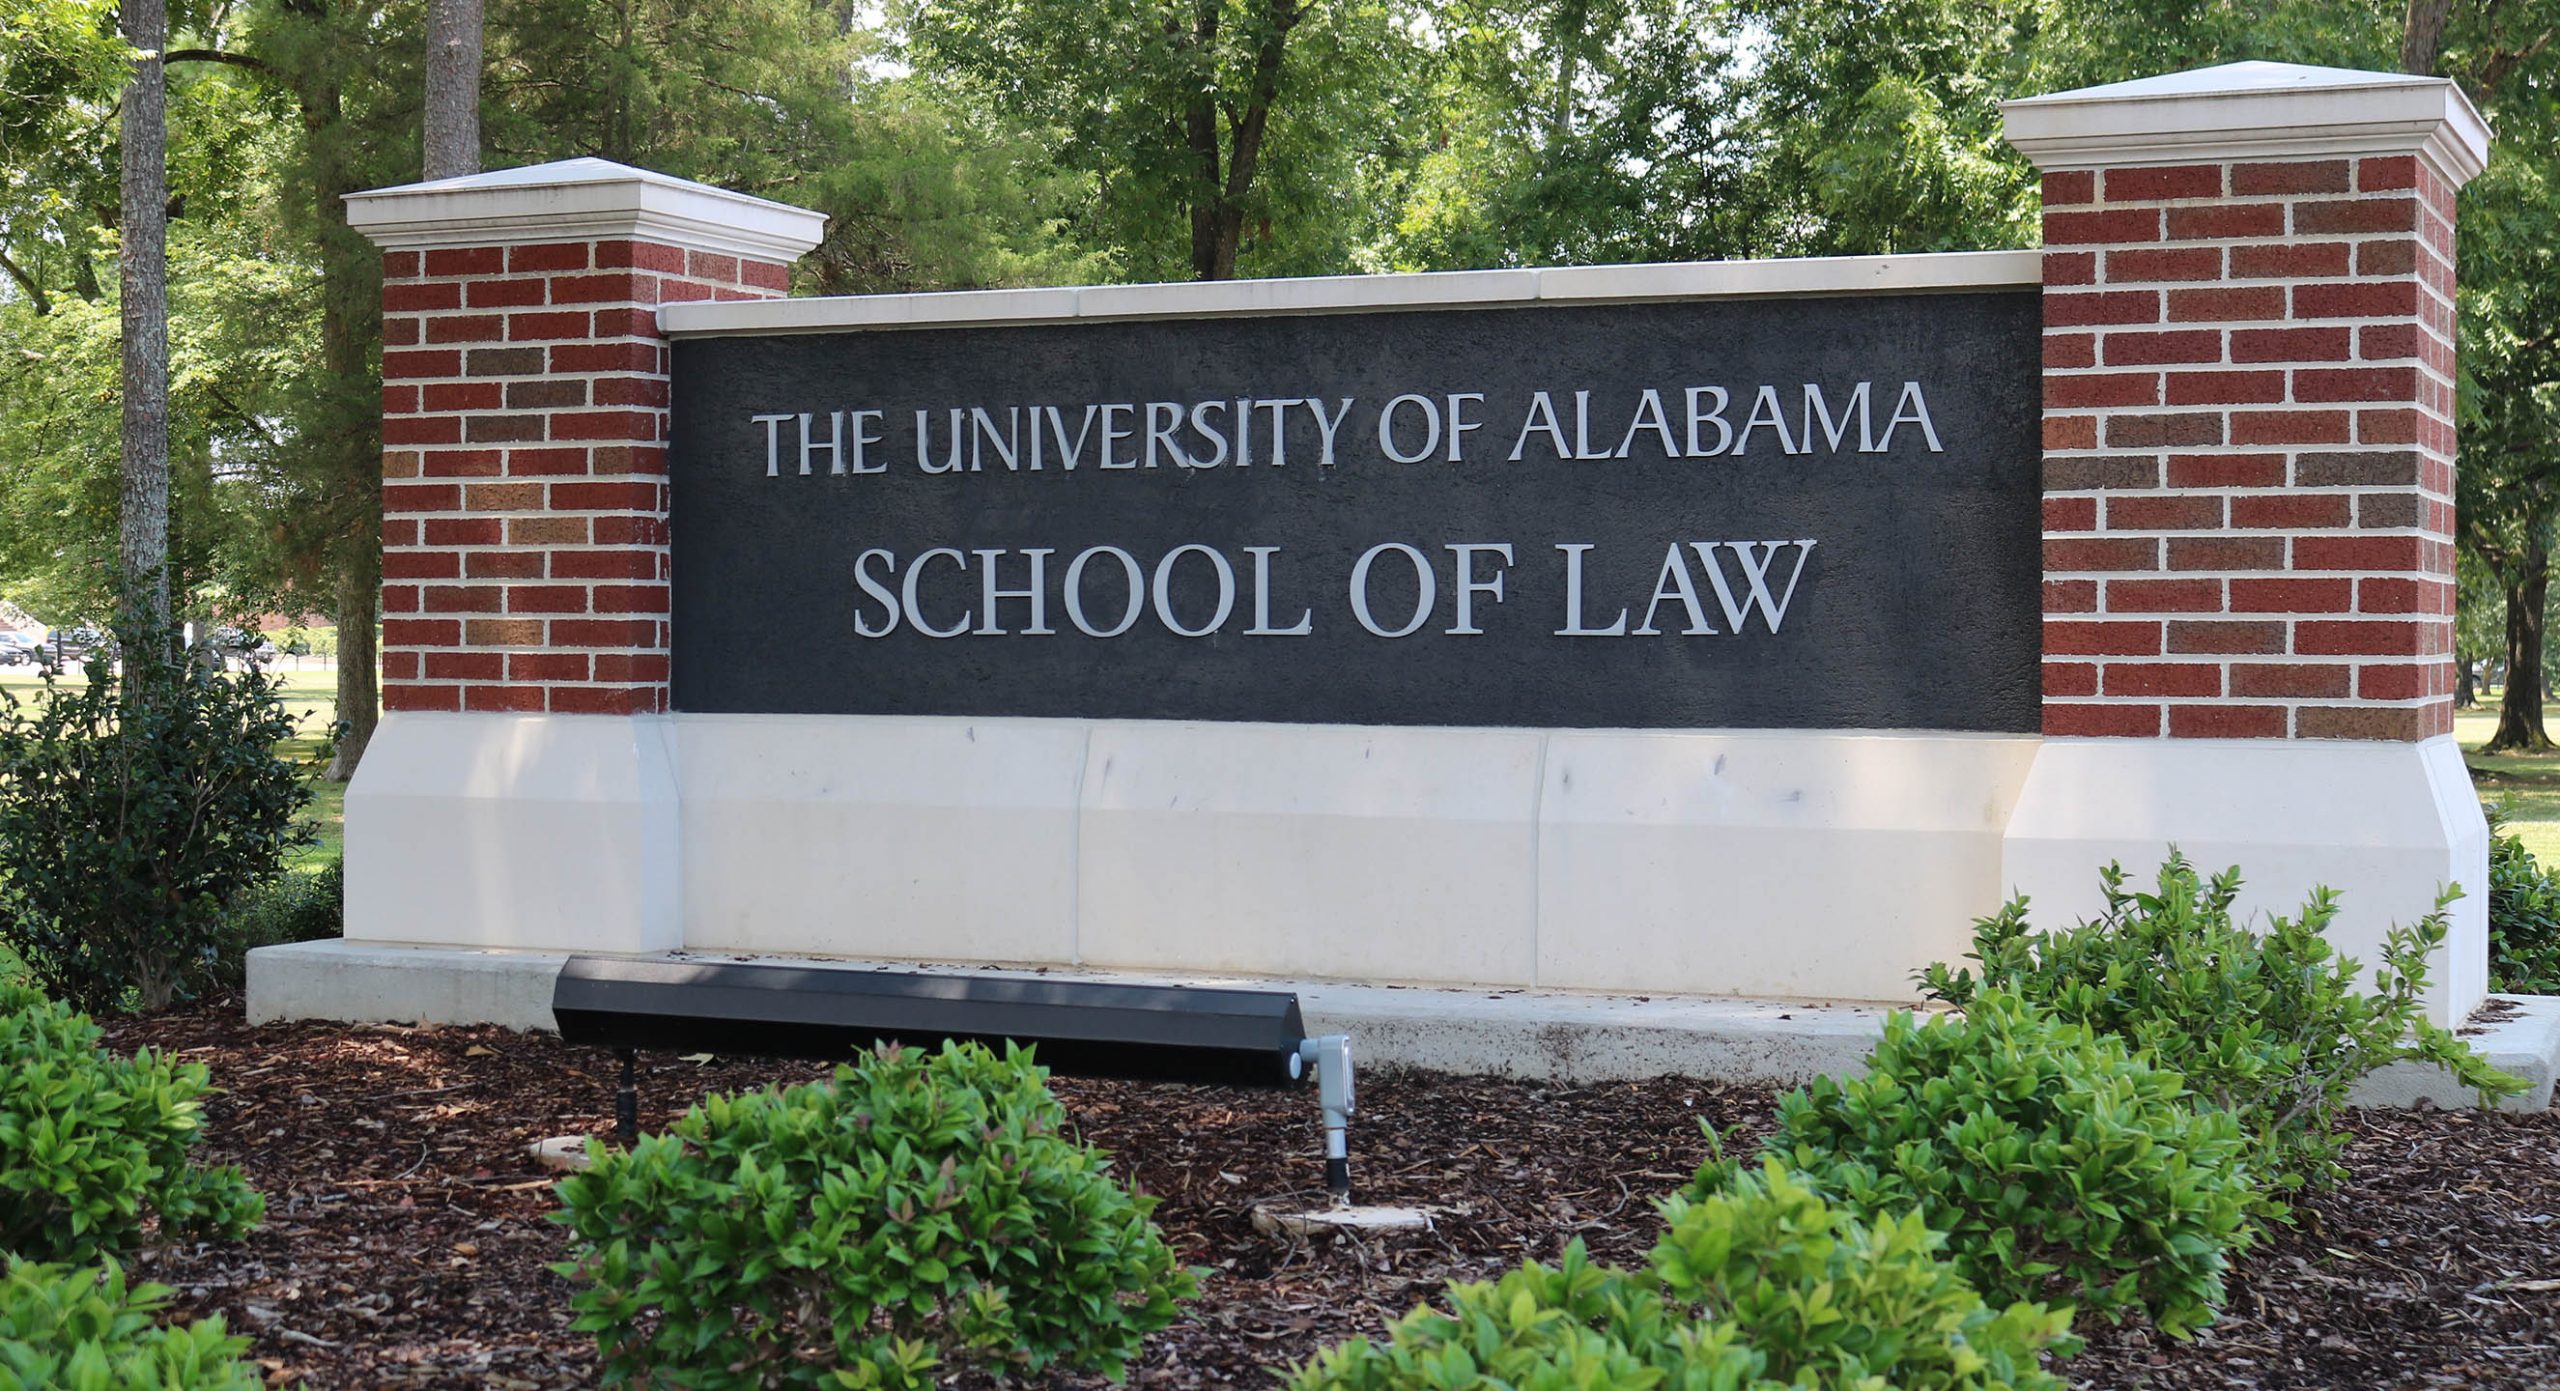 The sign for the University of Alabama School of Law